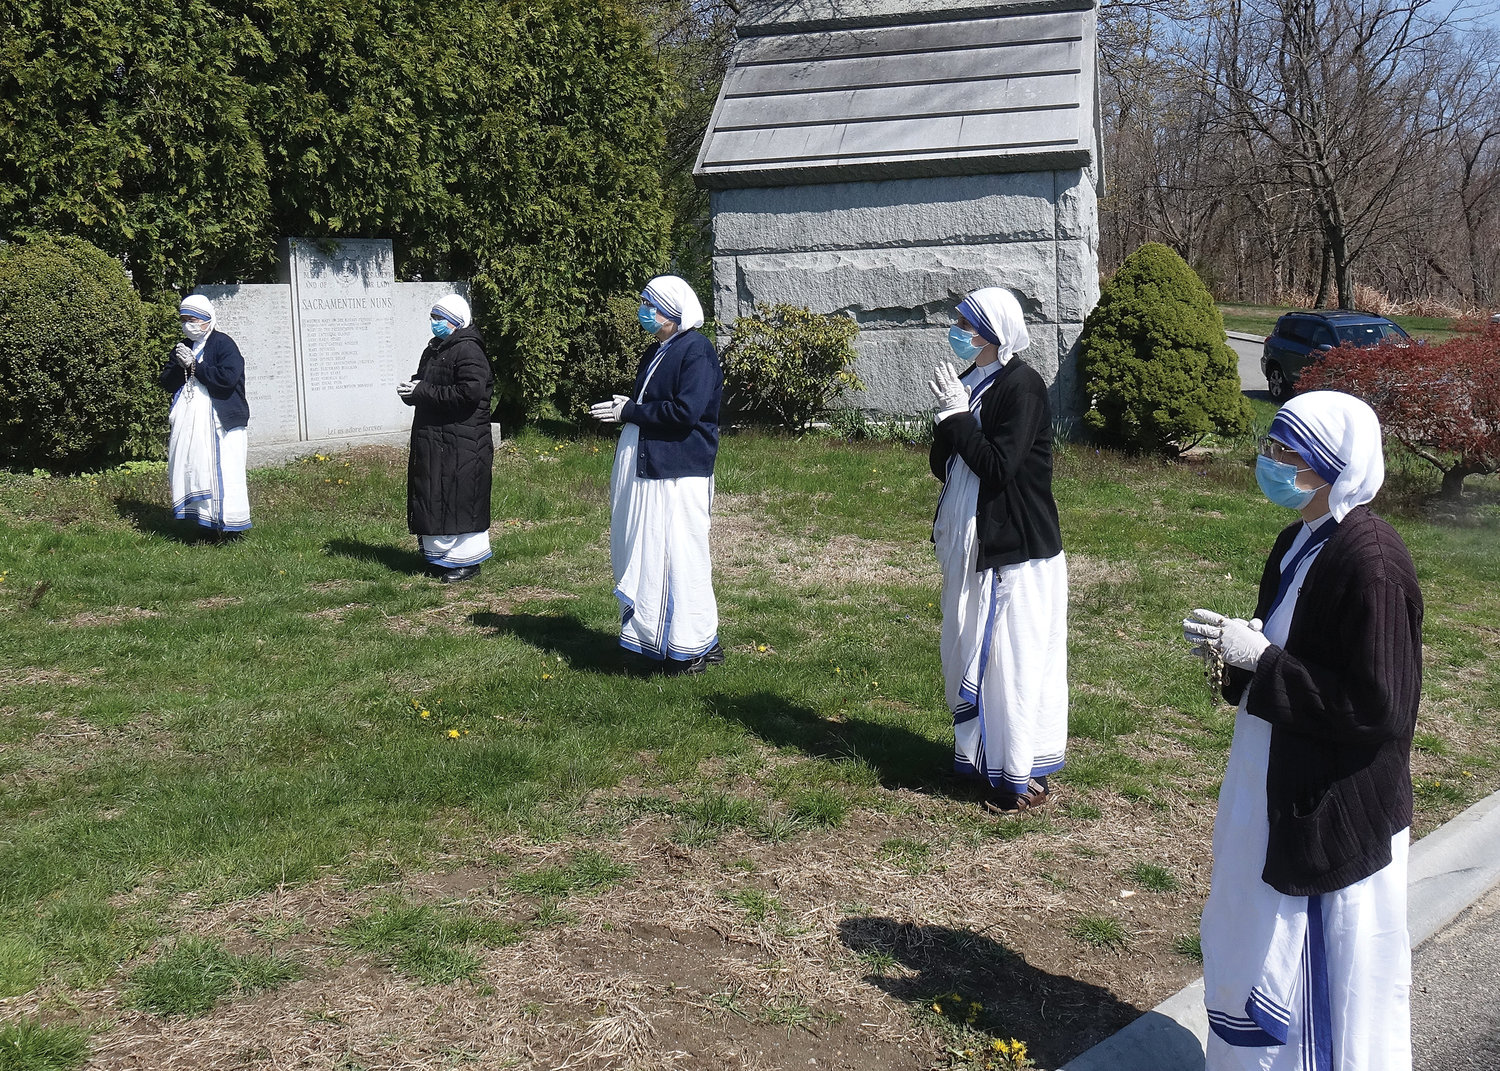 Missionaries of Charity sisters maintain a prayerful posture at a safe distance.